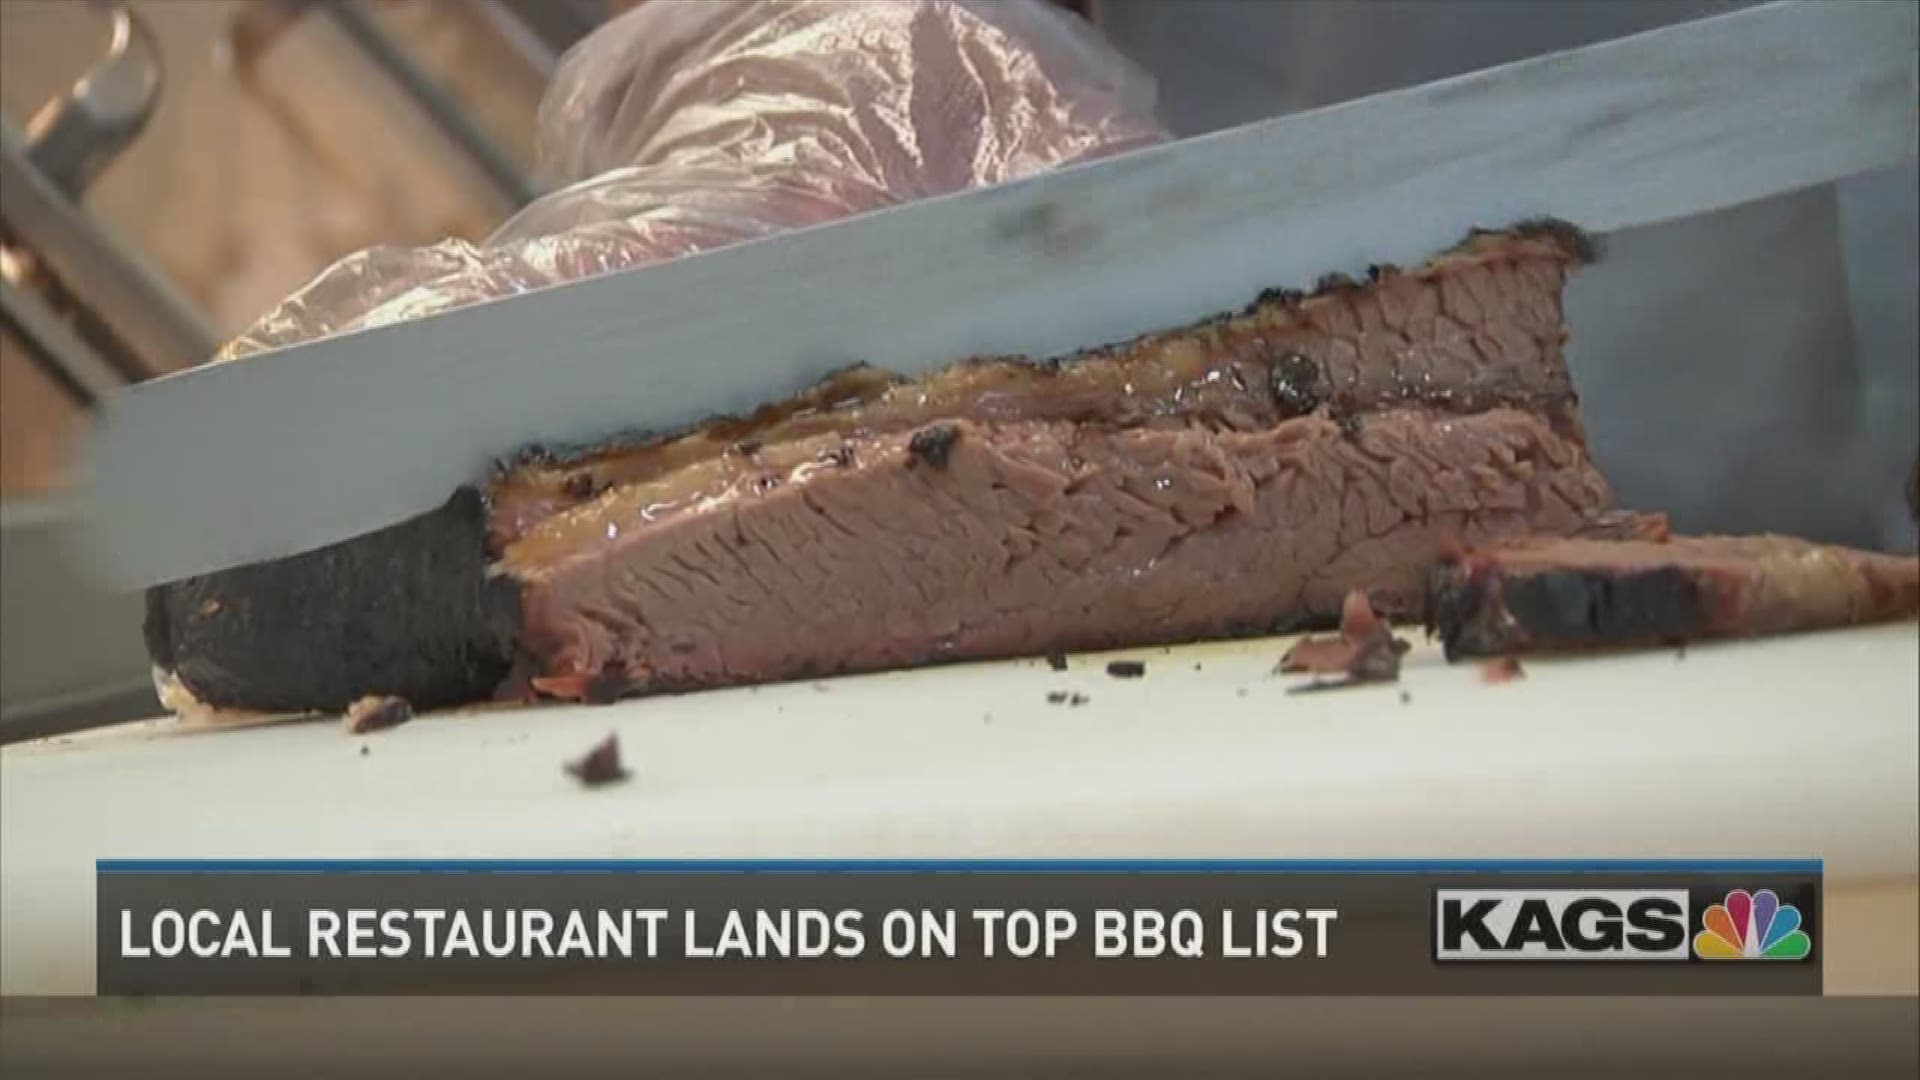 Fargo's in Bryan has landed on Texas Monthly's Best BBQ list for the third time.